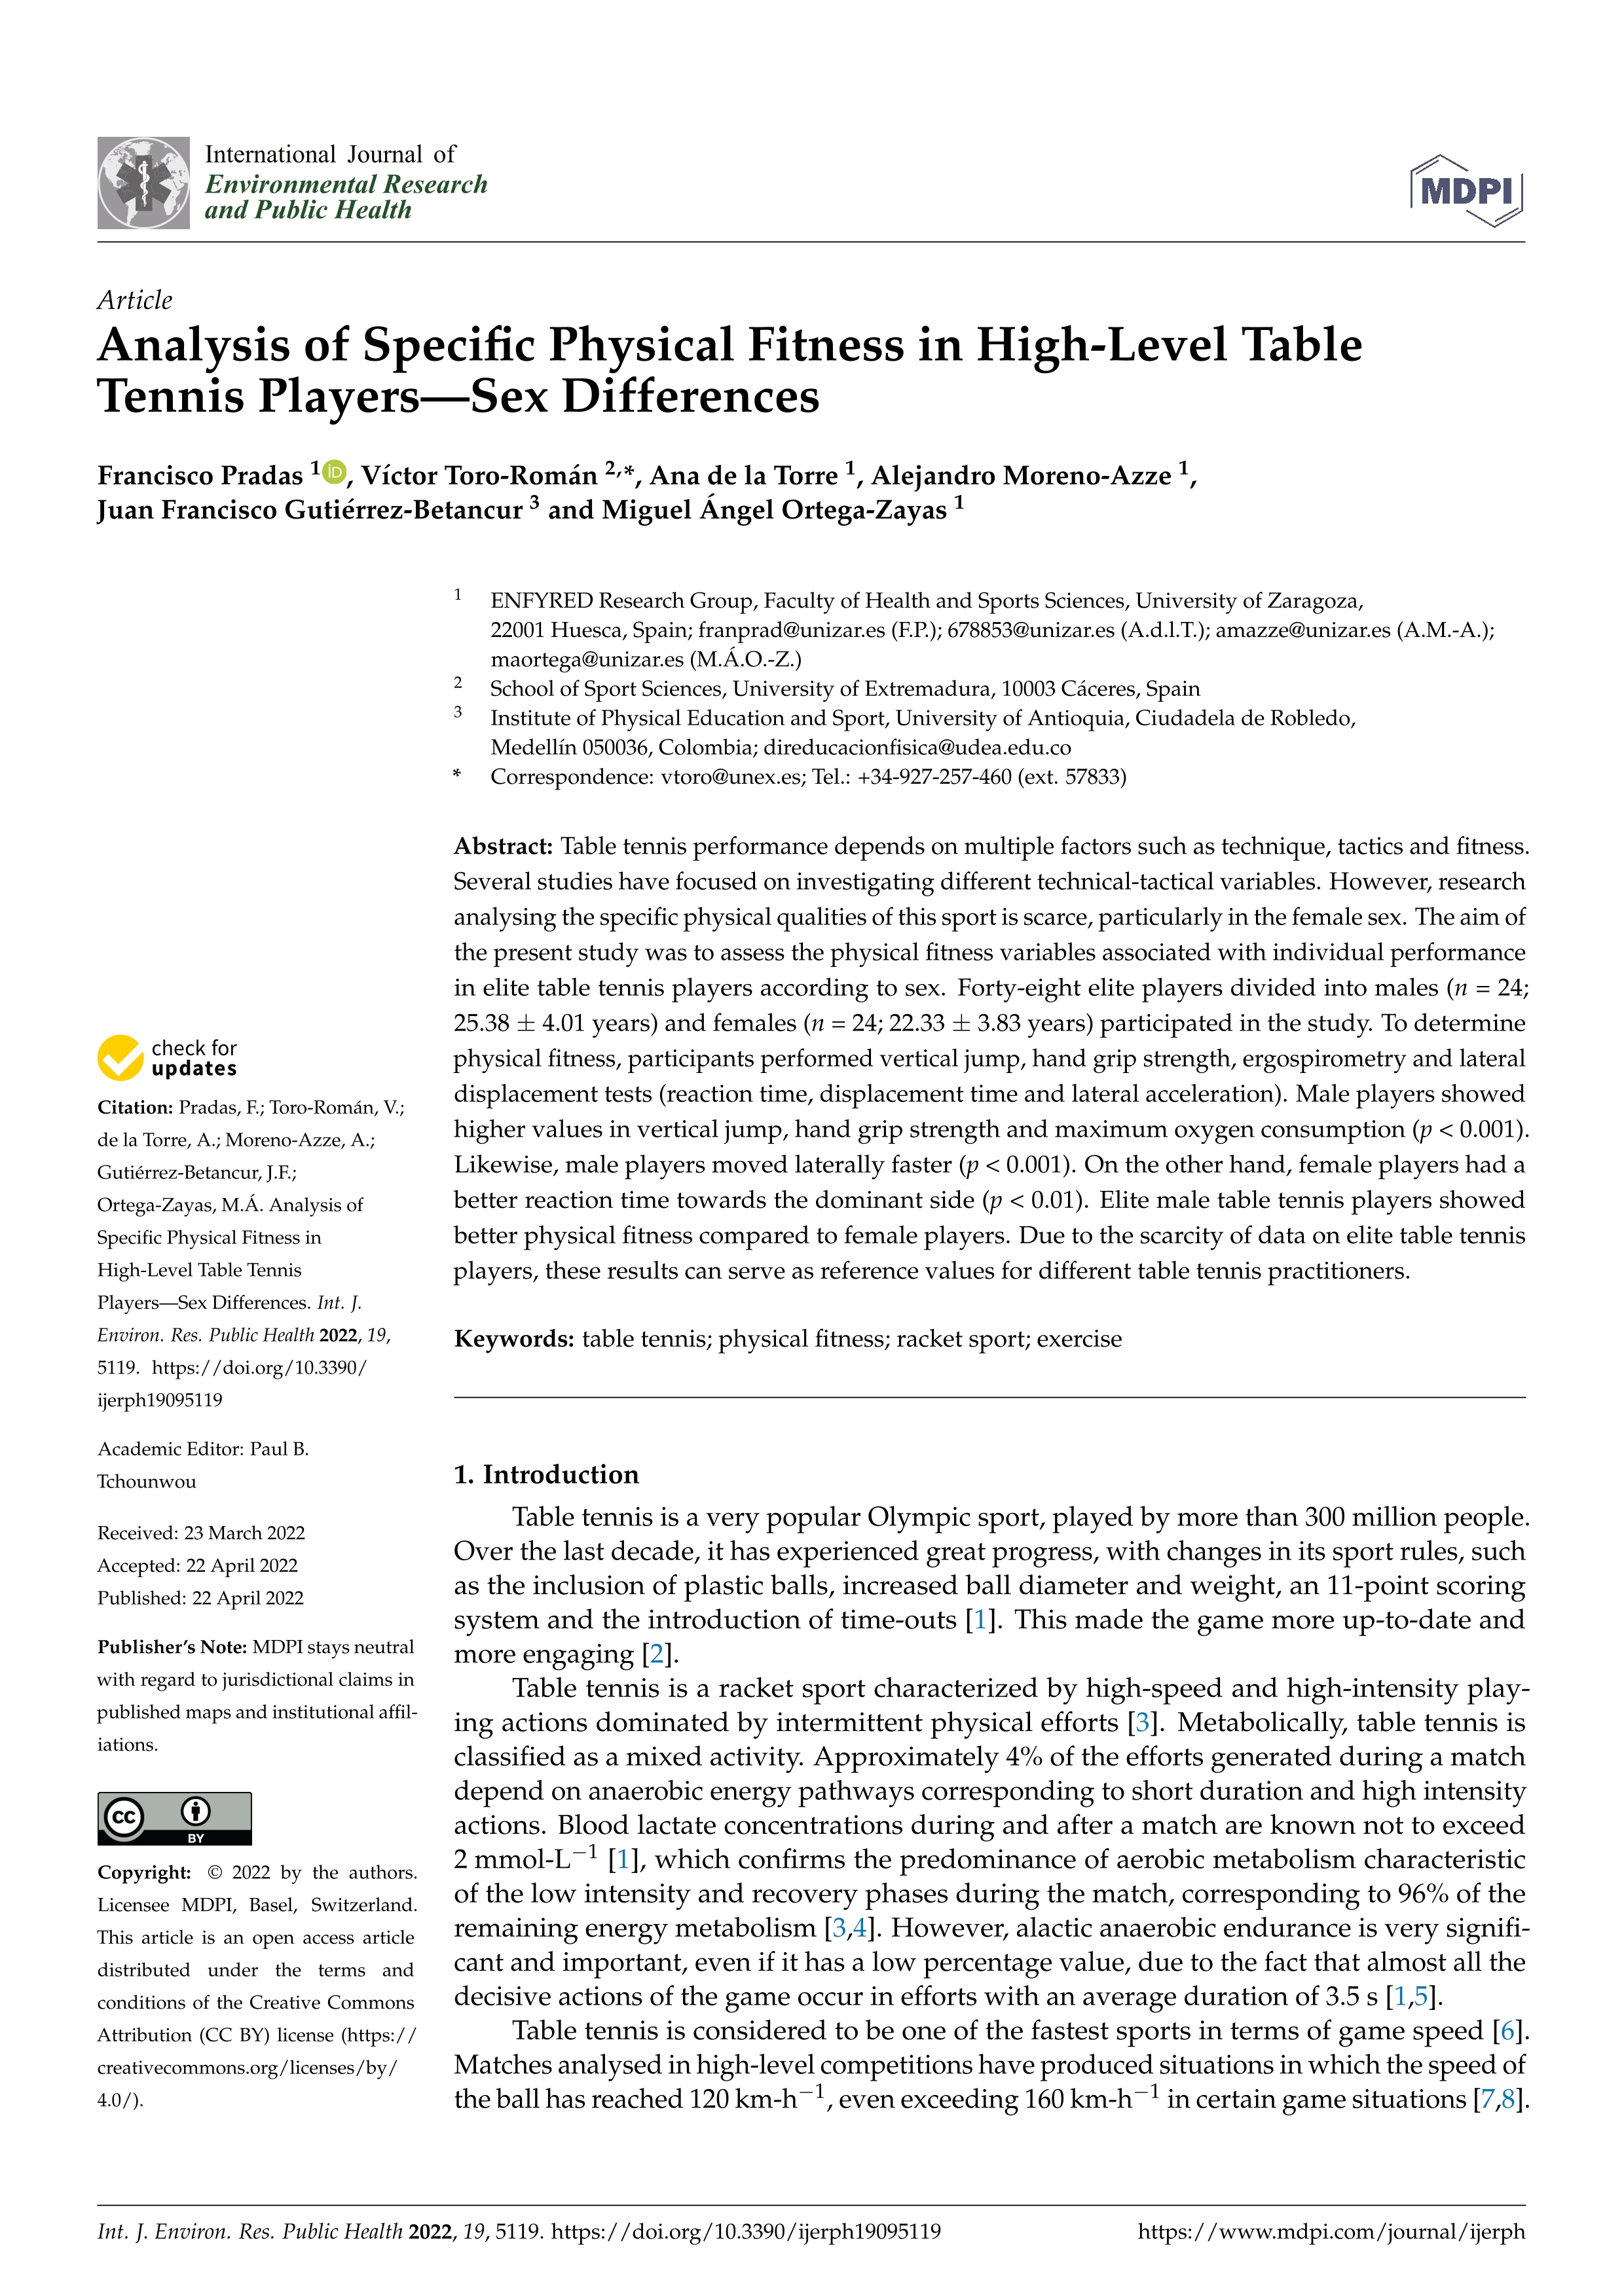 Analysis of specific physical fitness in high-level table tennis players—sex differences